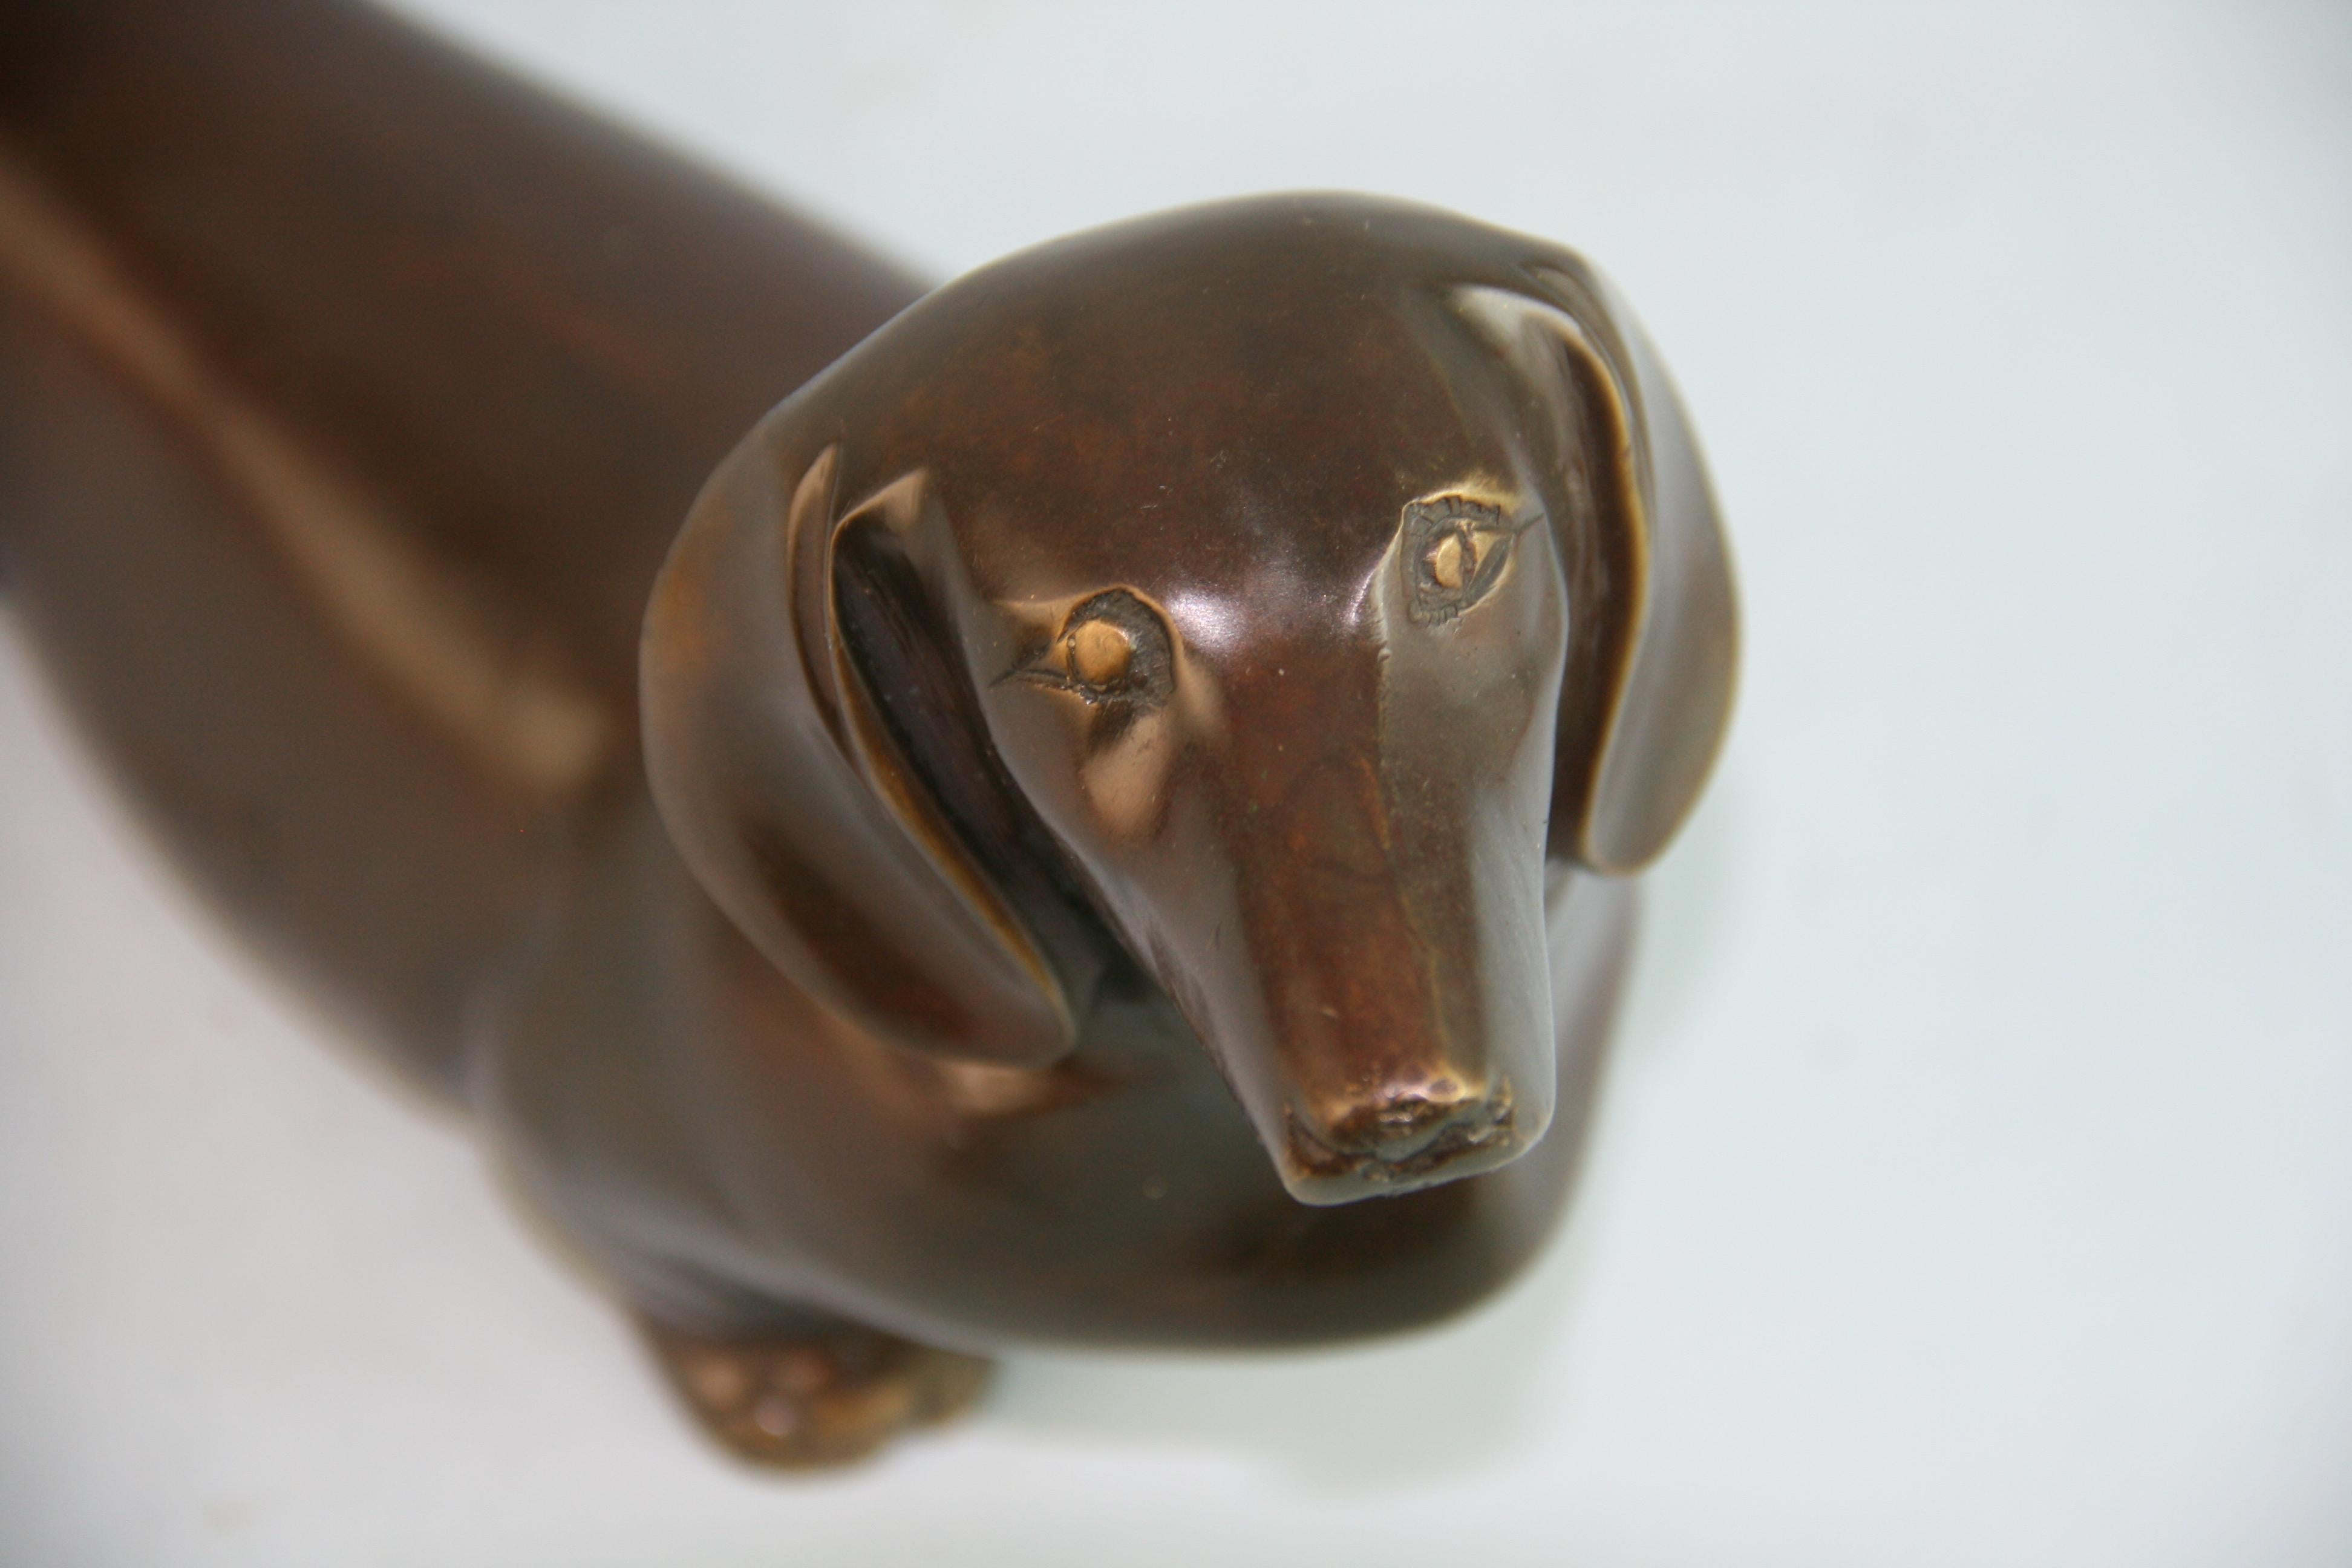 Hand-Crafted Japanese Cast bronze sculpture of a Dachshund Dog